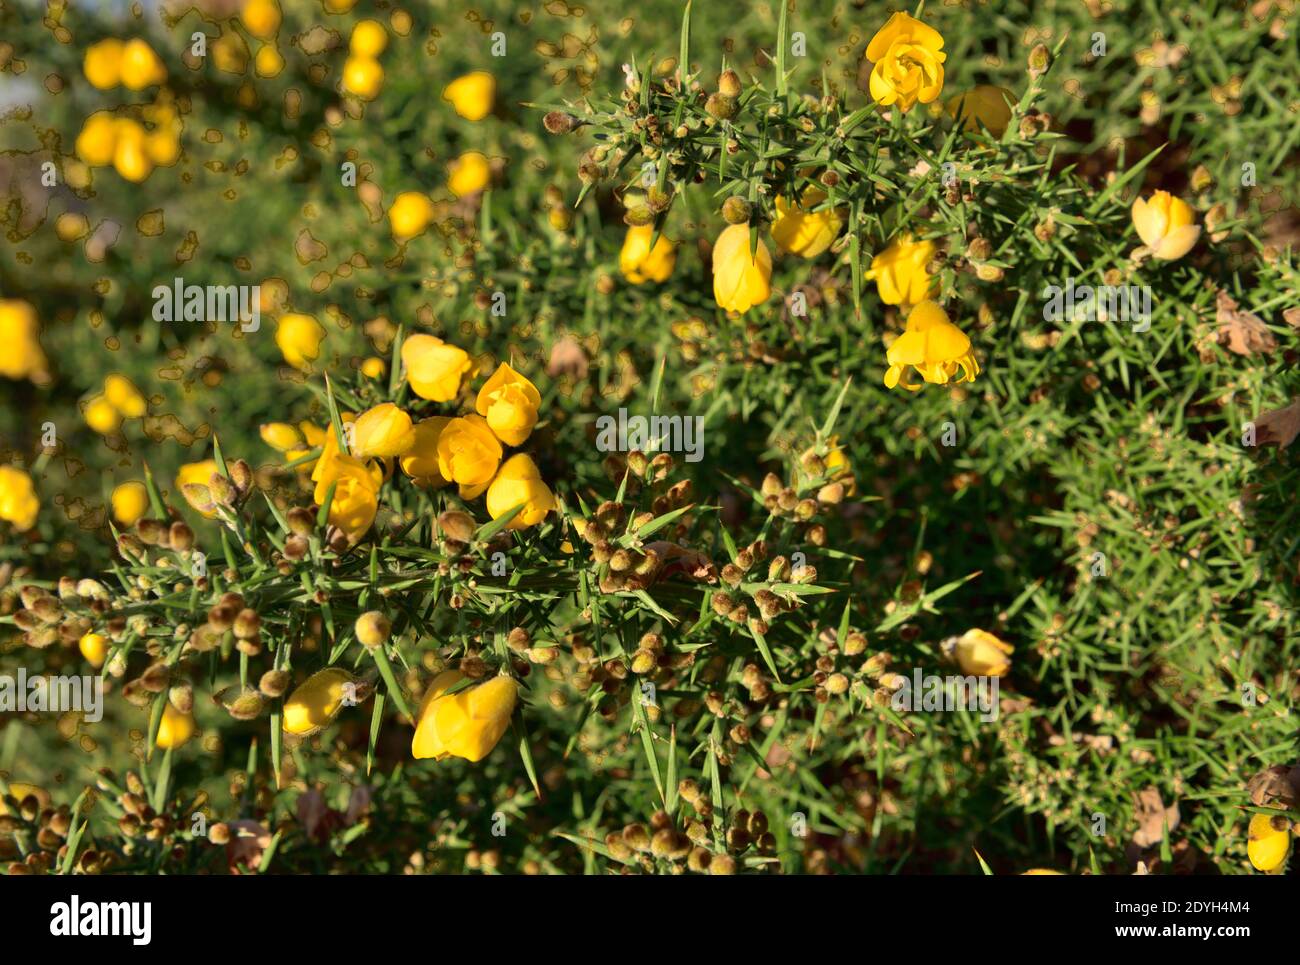 Yellow flowers, flower buds and needle-like leaves of gorse bush Stock Photo